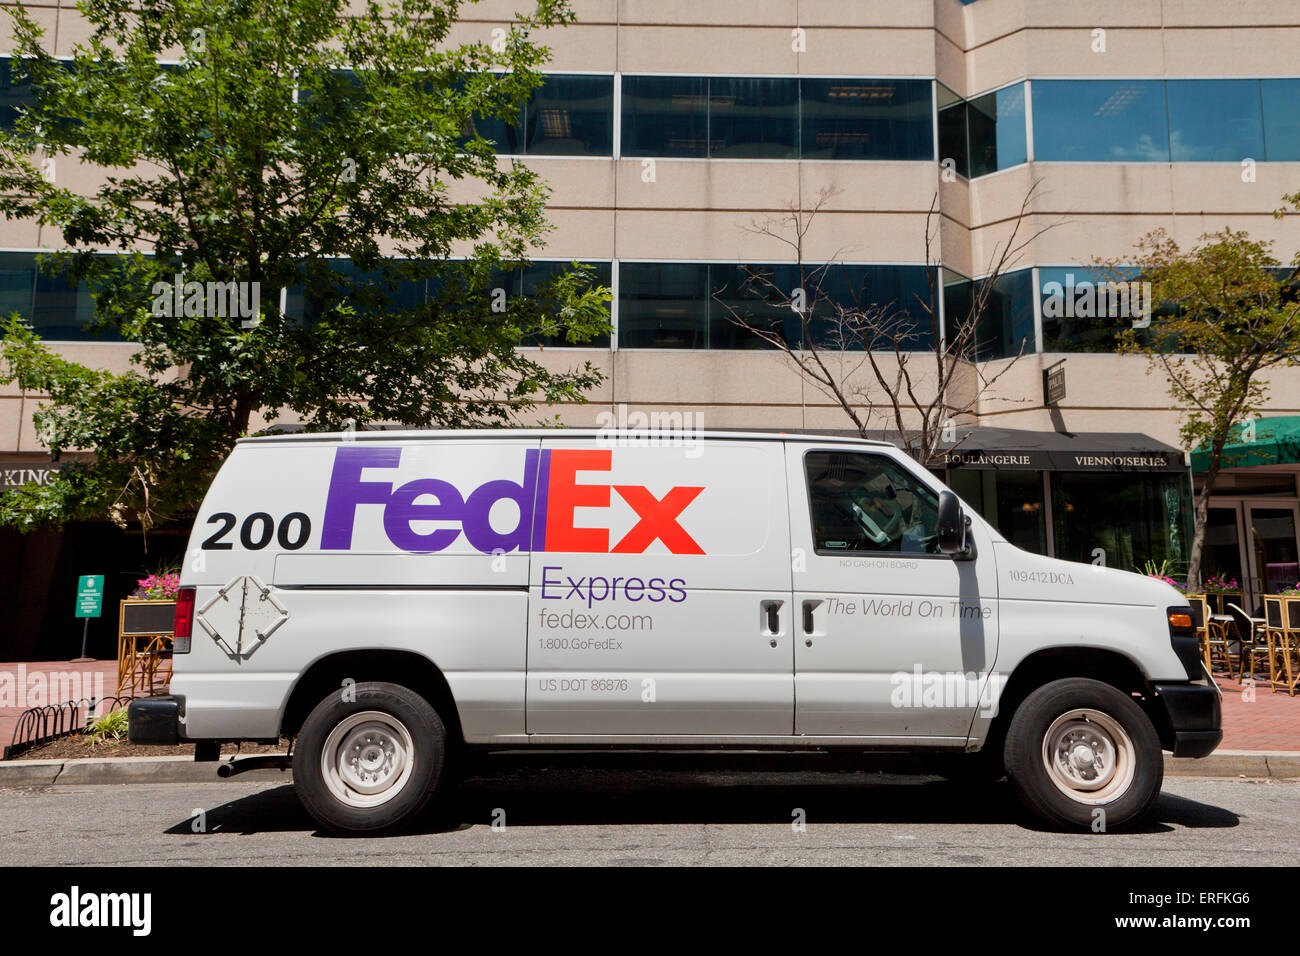 FedEx truck parked in front of office buildings - Washington, DC USA Stock Photo